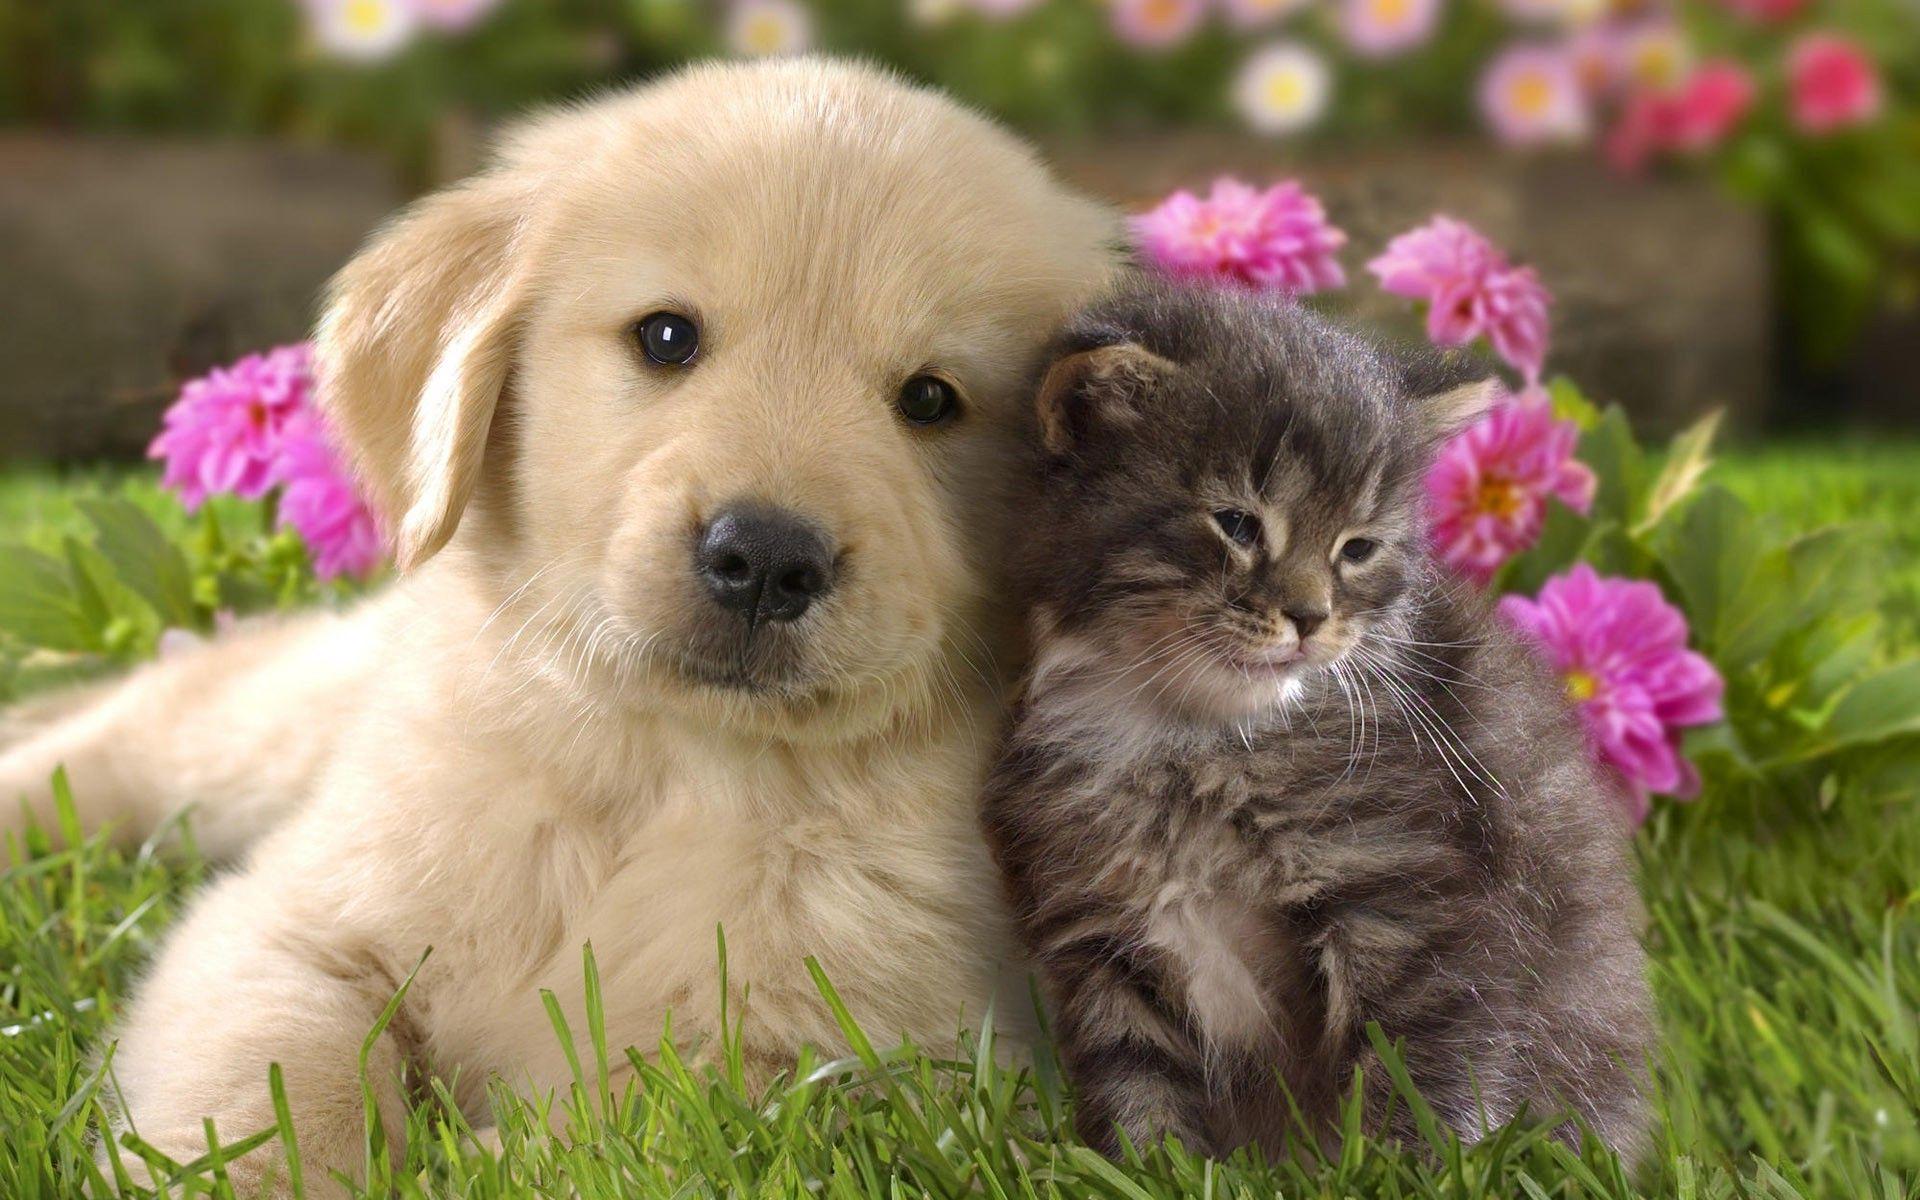 Free Cute Dog and Cat Wallpaper HD. DOGS AND CATS